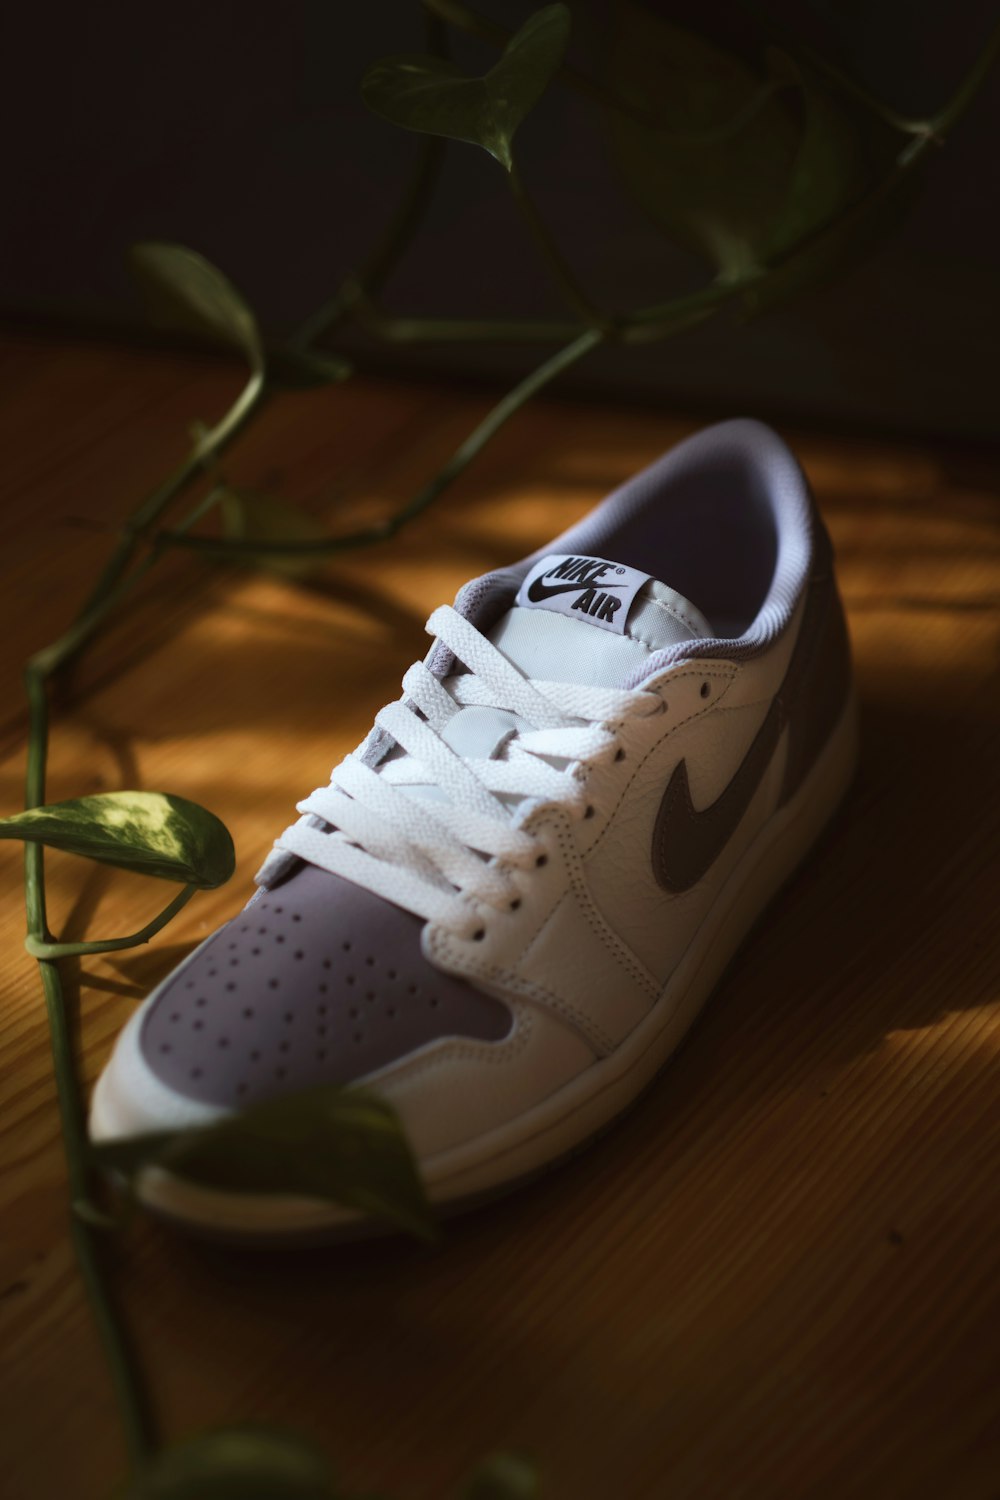 a pair of white shoes sitting on top of a wooden floor